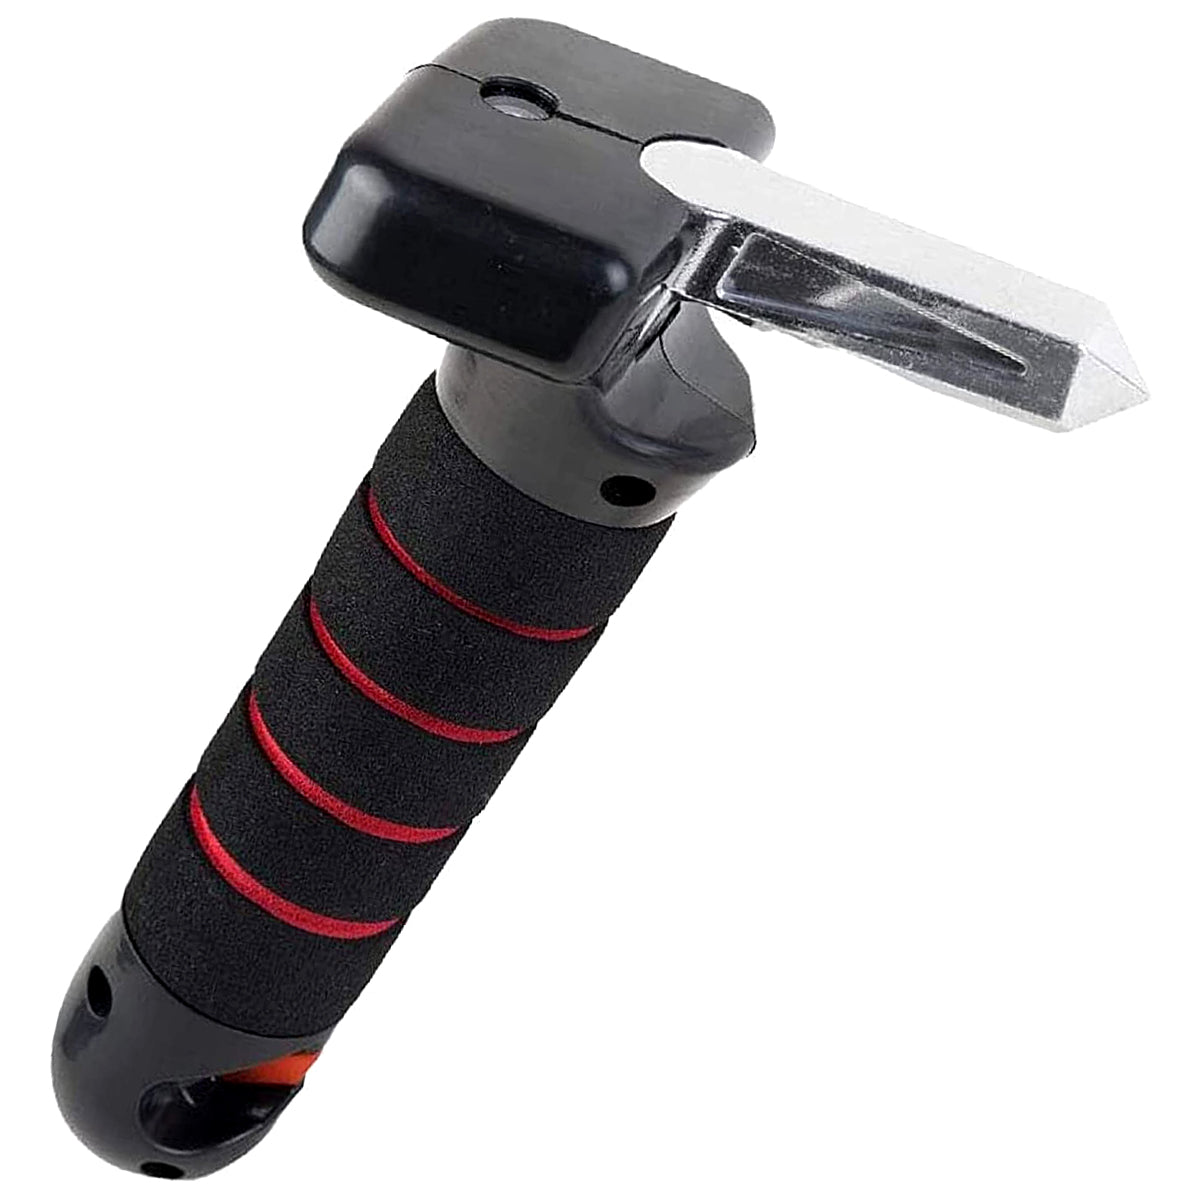 New Car Assist Handle 4 in 1 Vehicle Support Handle with LED Flashlight Seatbelt Cutter Window Breaker Auto Cane Grab Bar.